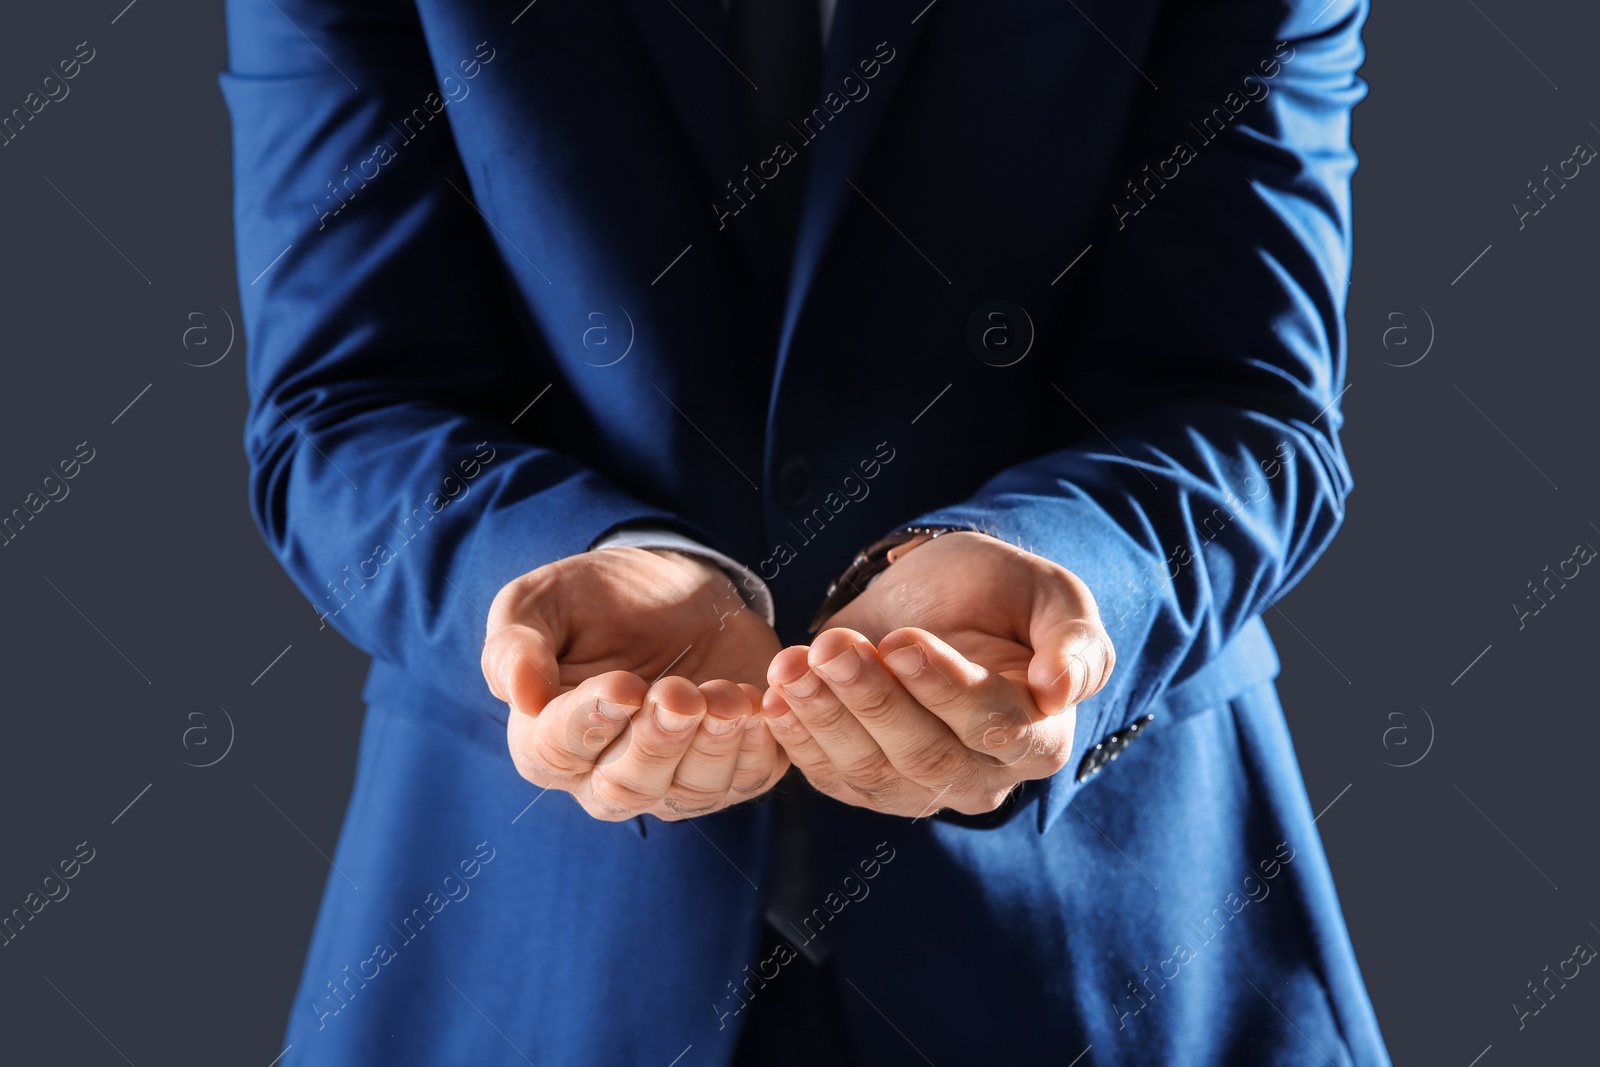 Photo of Businessman holding something in hands on dark background